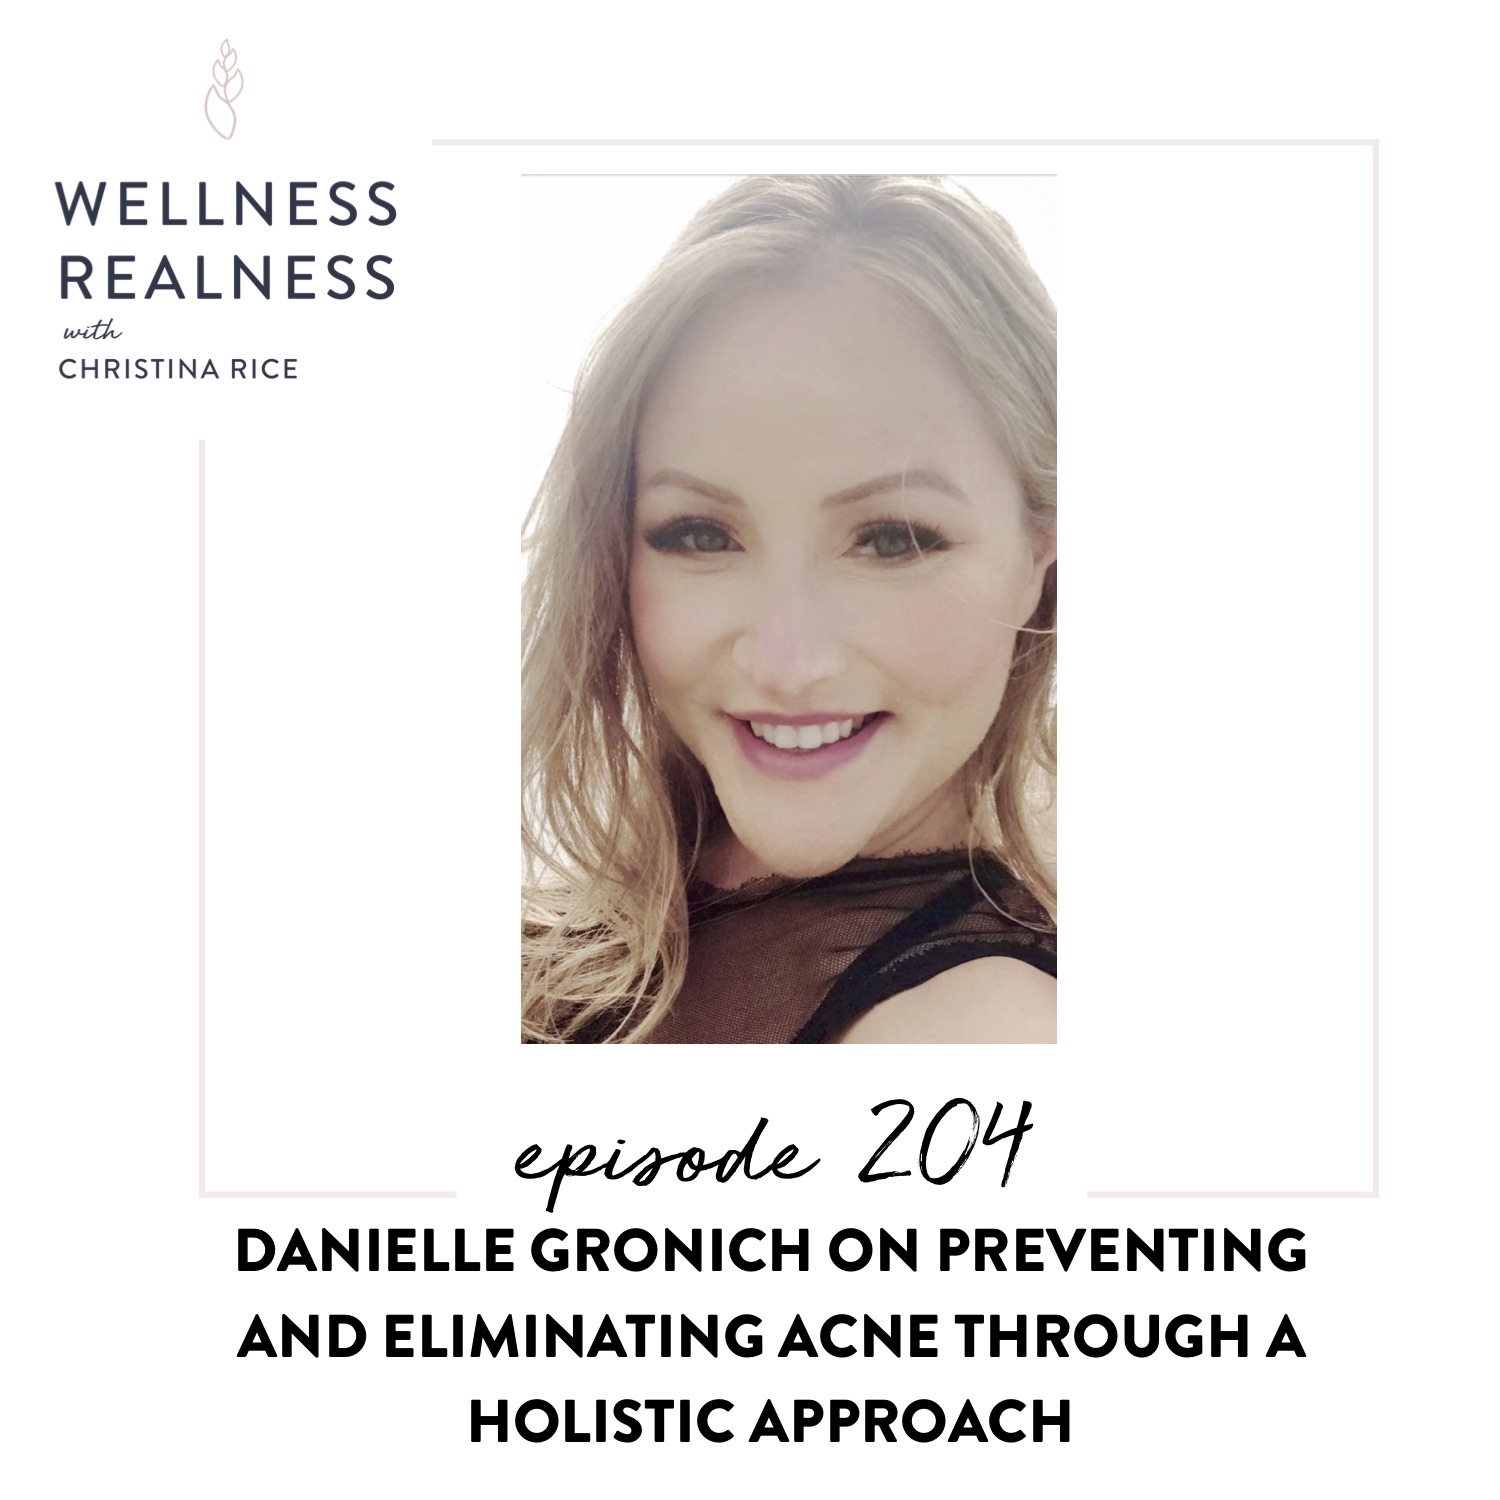 204: Danielle Gronich on Preventing and Eliminating Acne Through a Holistic Approach